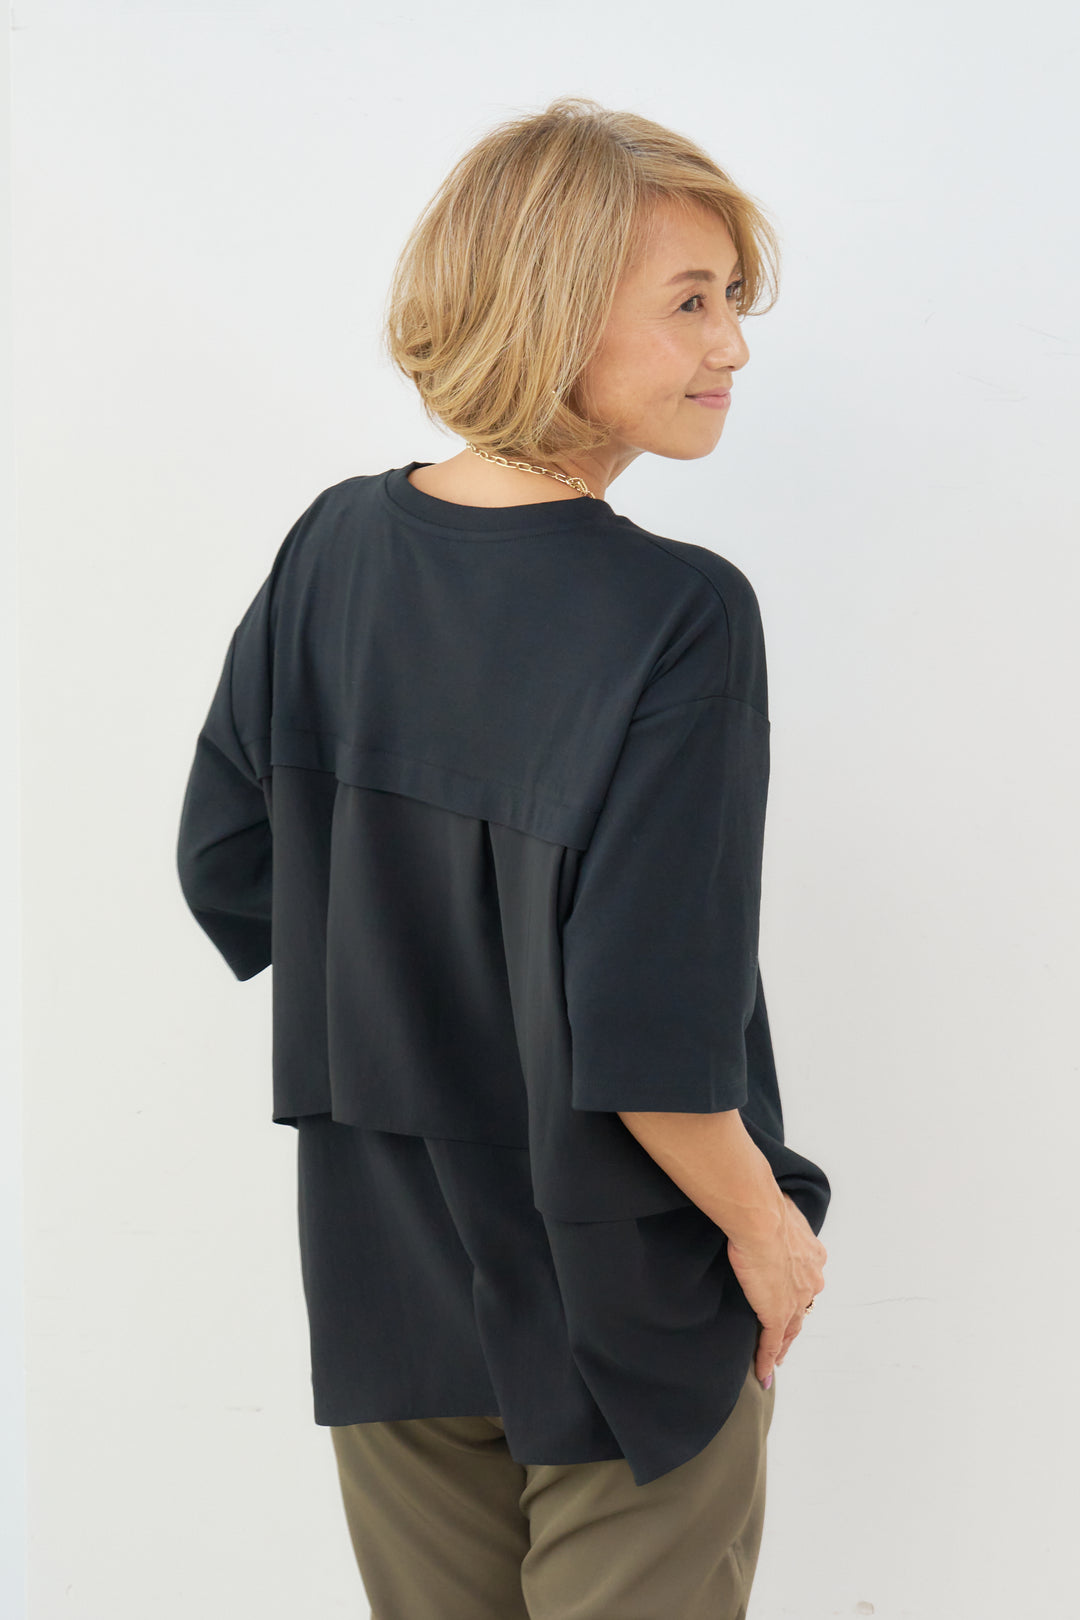 [2SET] [Cool to the touch] Compact smooth back frill pullover 